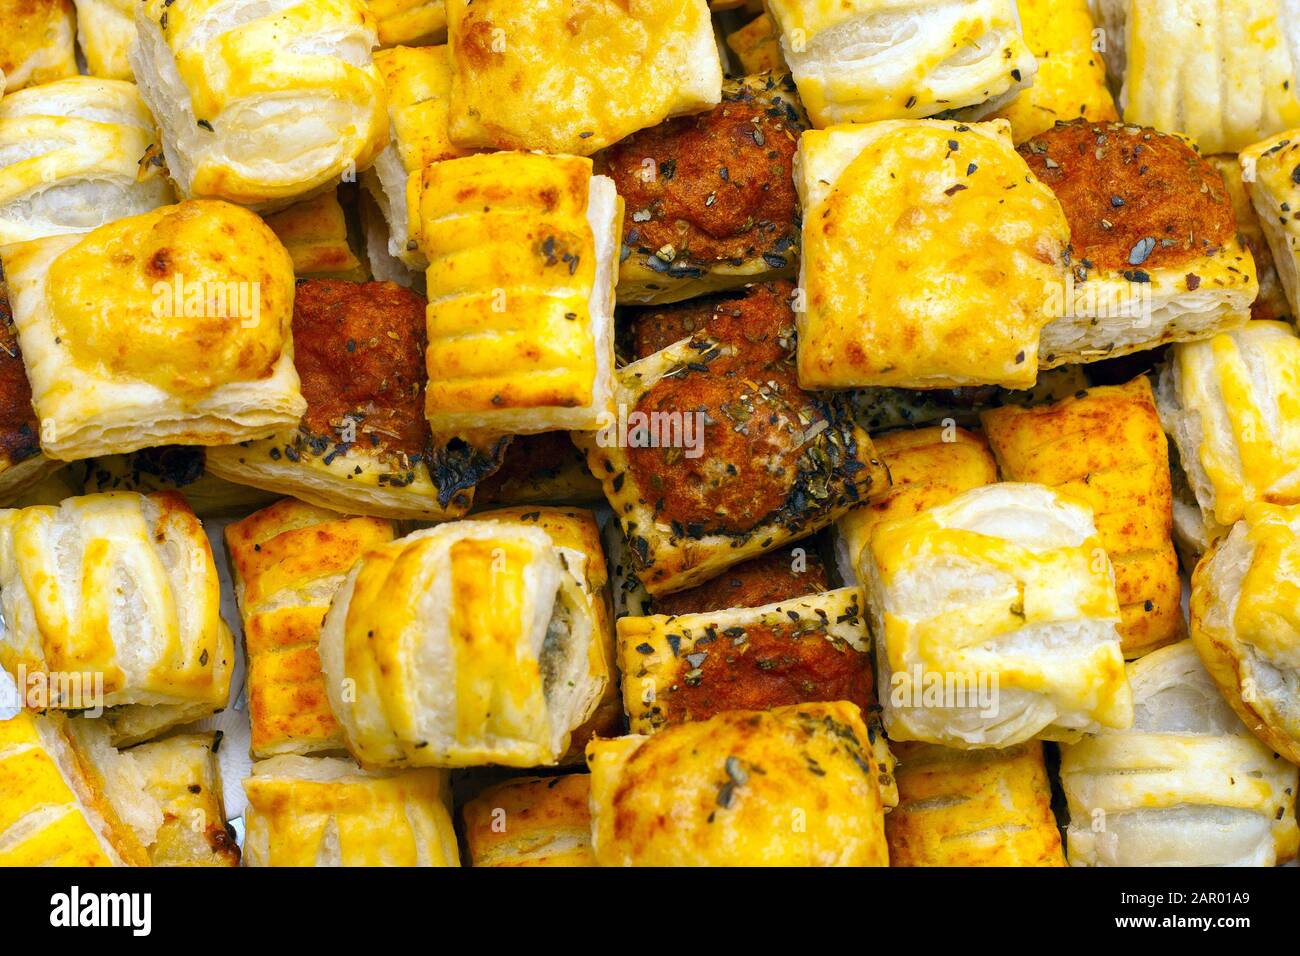 Savoury Pastry Buffet Selection of Mini Pastries Stock Photo